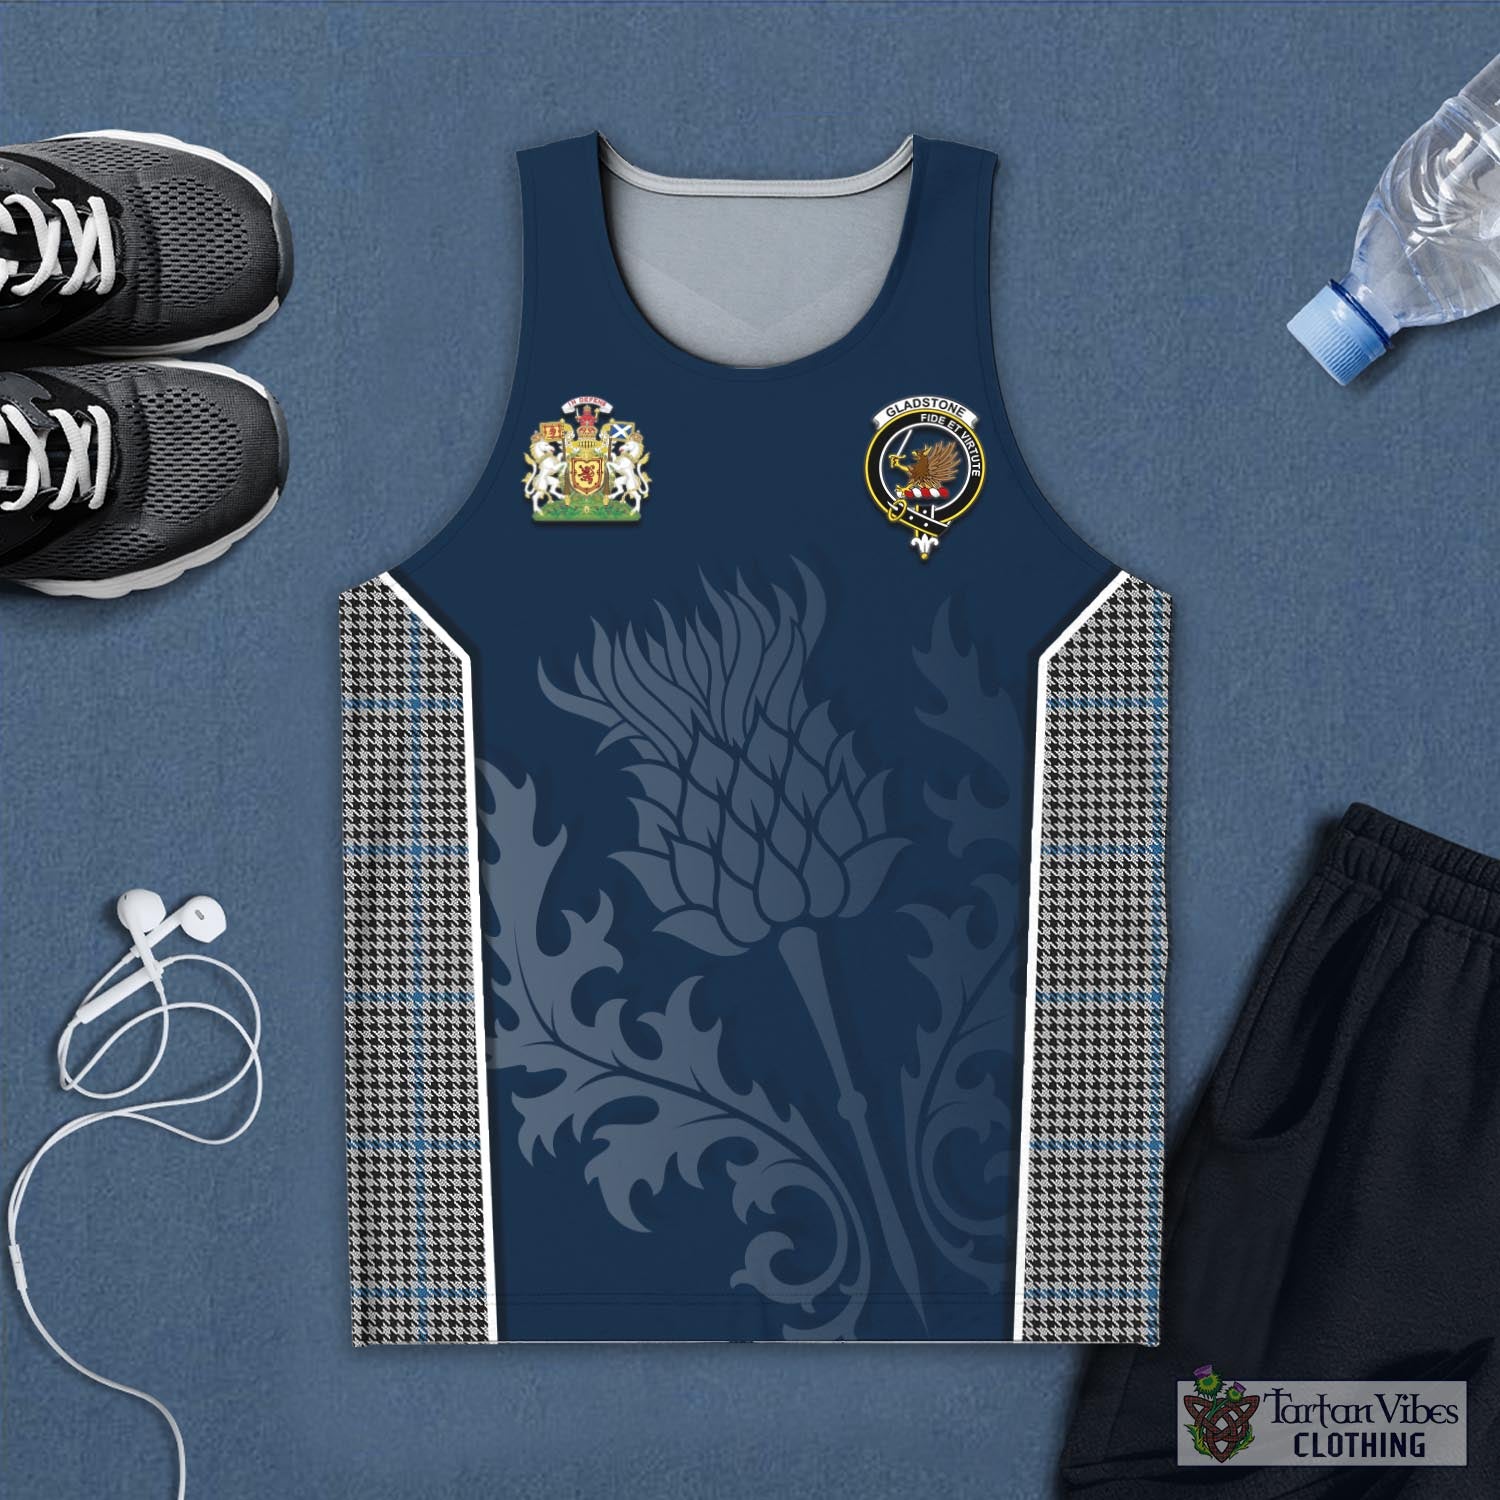 Tartan Vibes Clothing Gladstone Tartan Men's Tanks Top with Family Crest and Scottish Thistle Vibes Sport Style